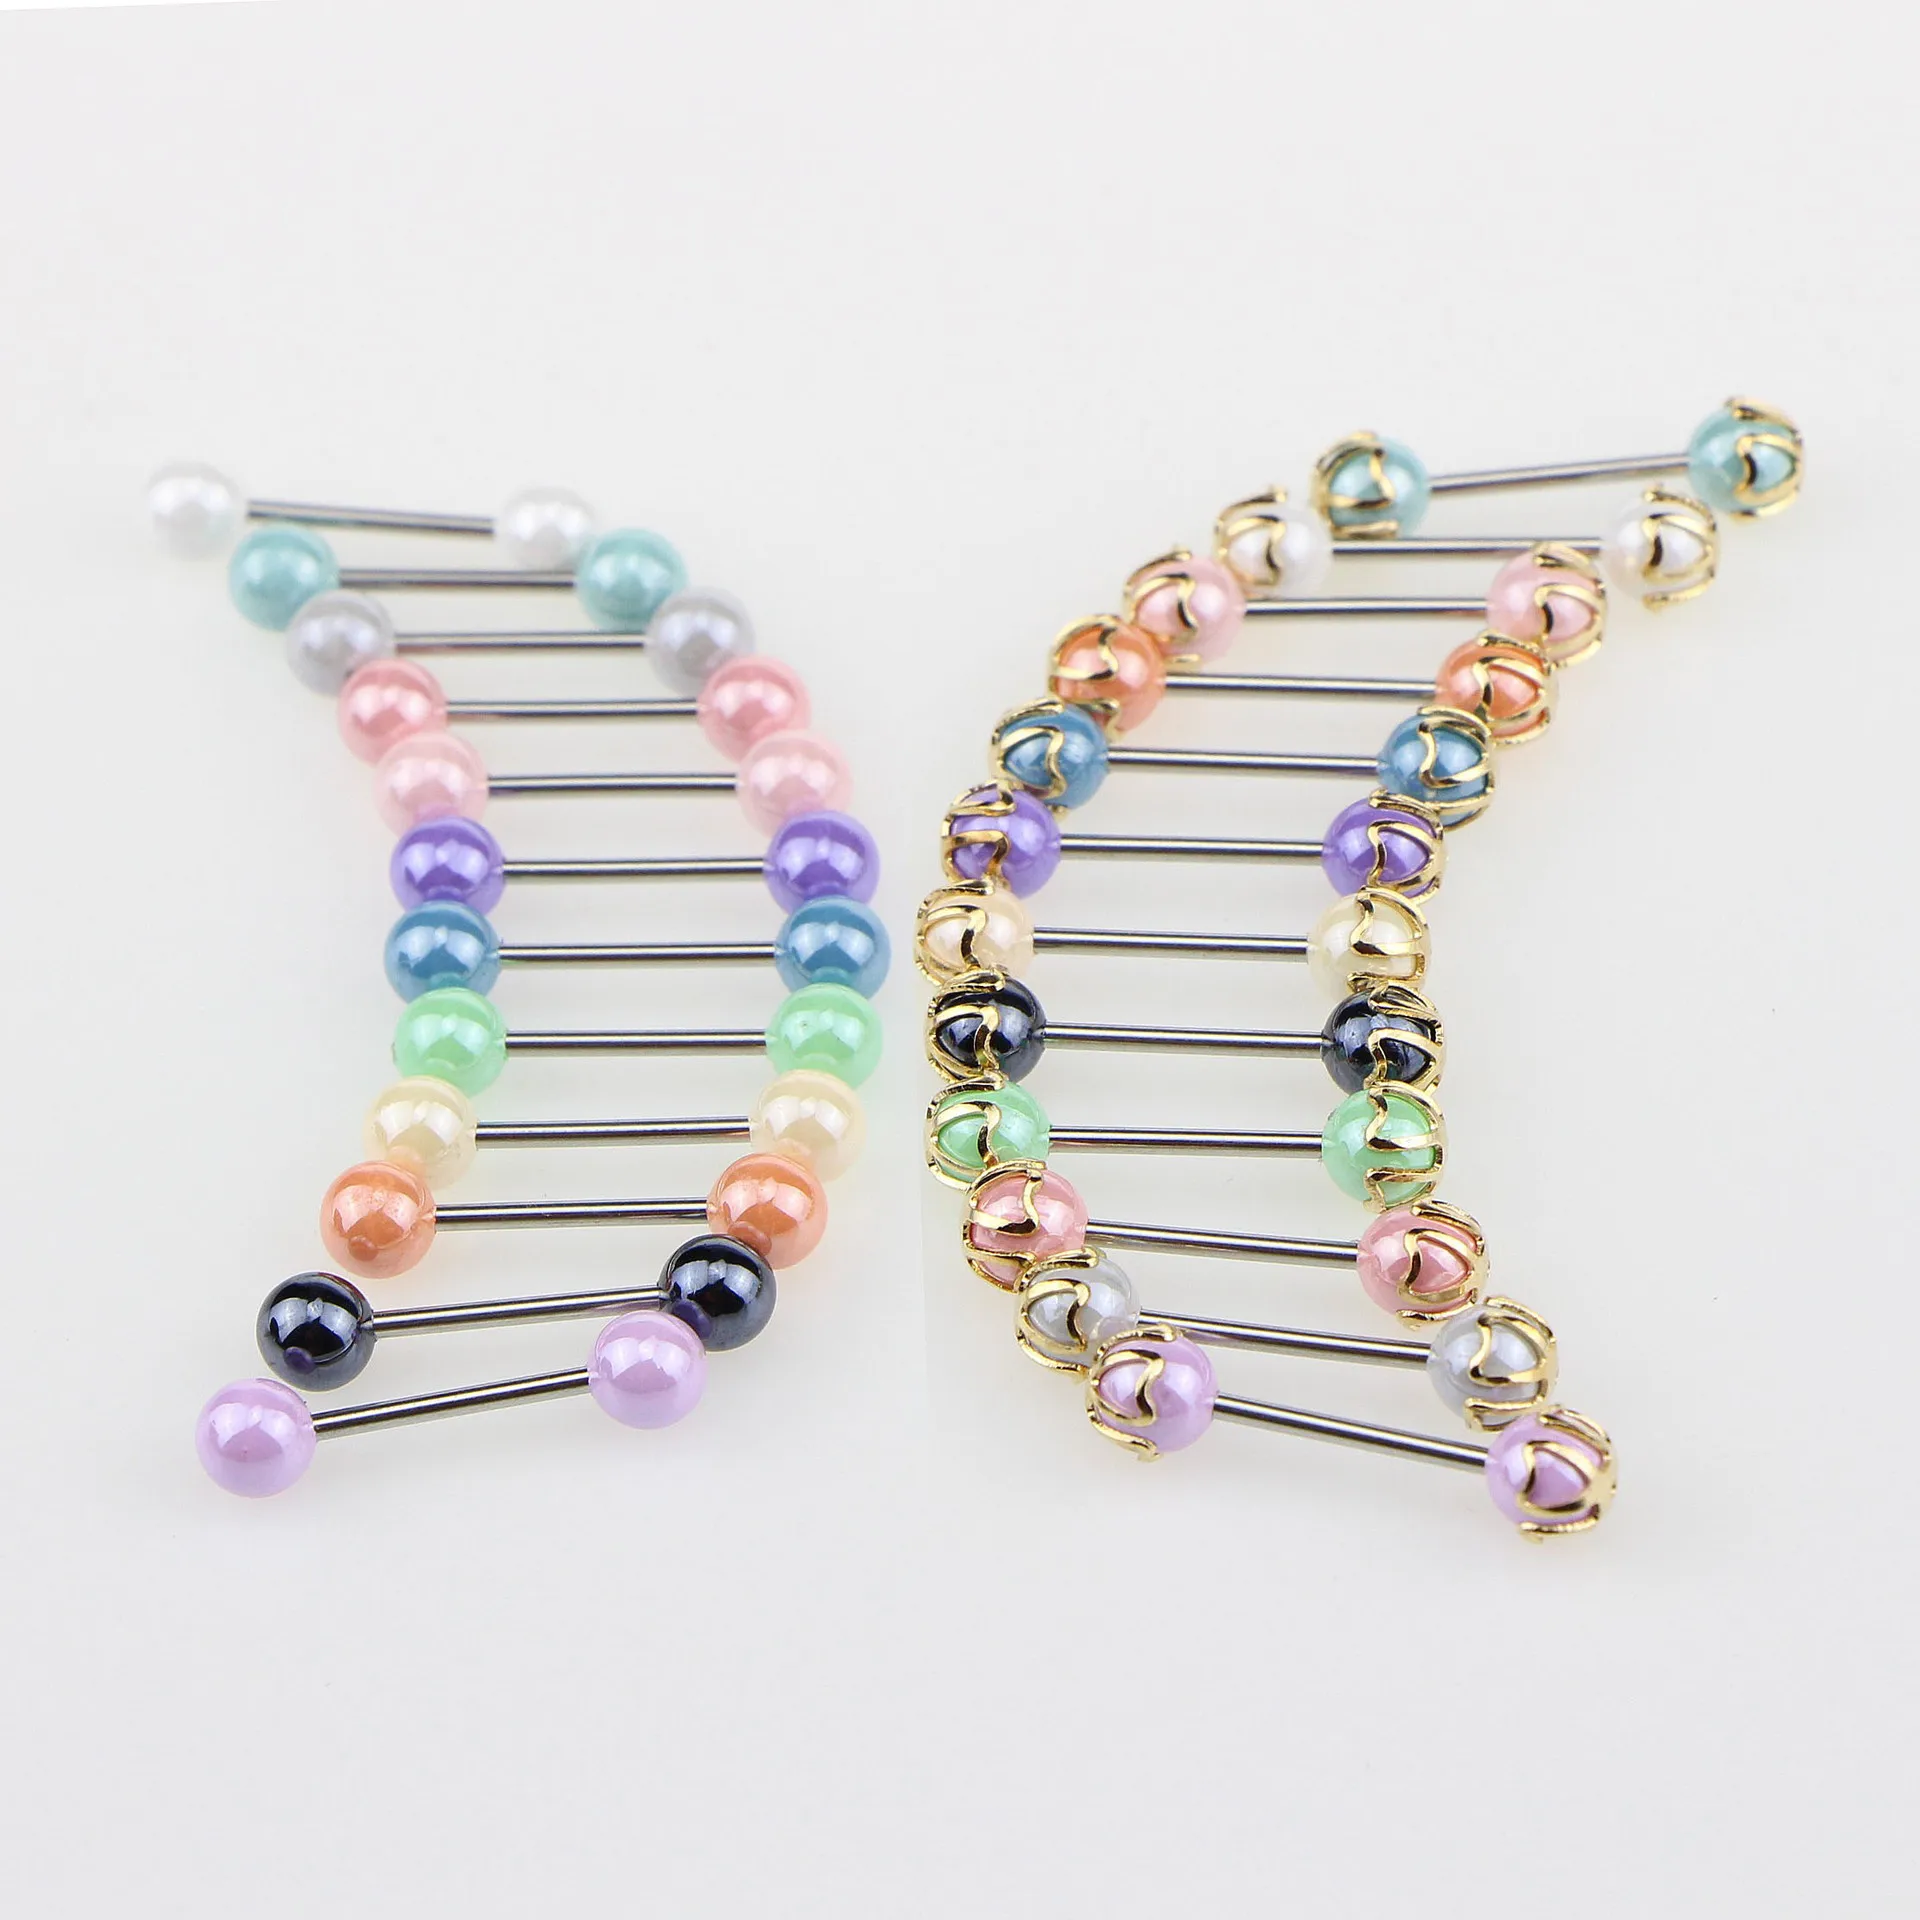 

New Arrival Acrylic Piercing Stainless Steel Tongue Ring Women Barbell Tongue Ring Body Piercing Jewelry Set, Multi-color